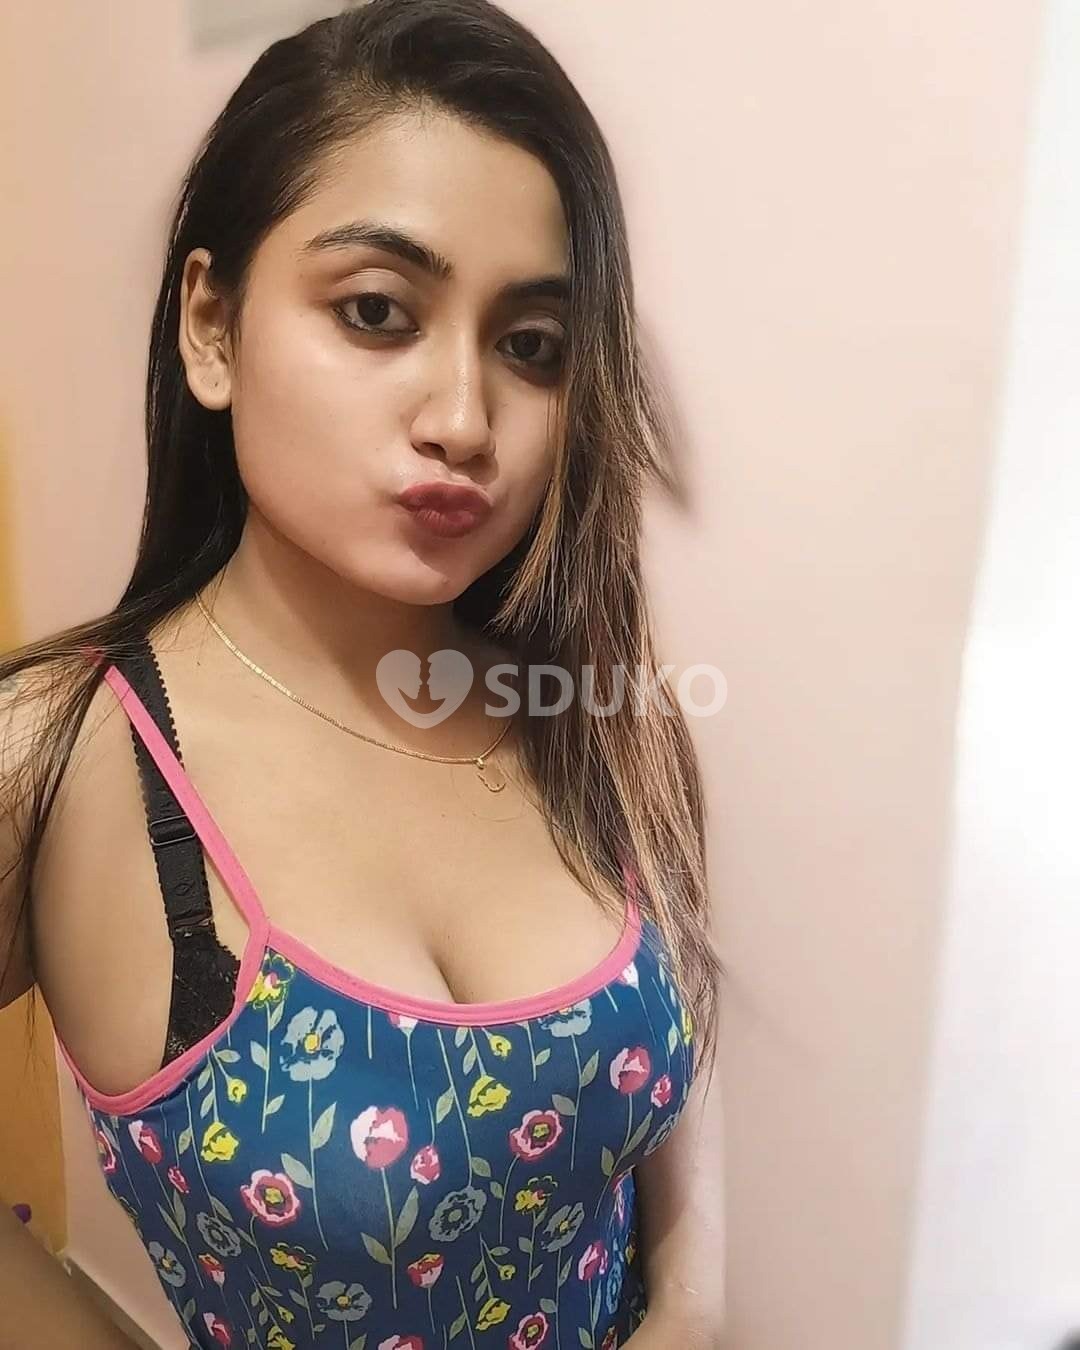 Varanasi City best call girl service available 24 hours full safe and secure